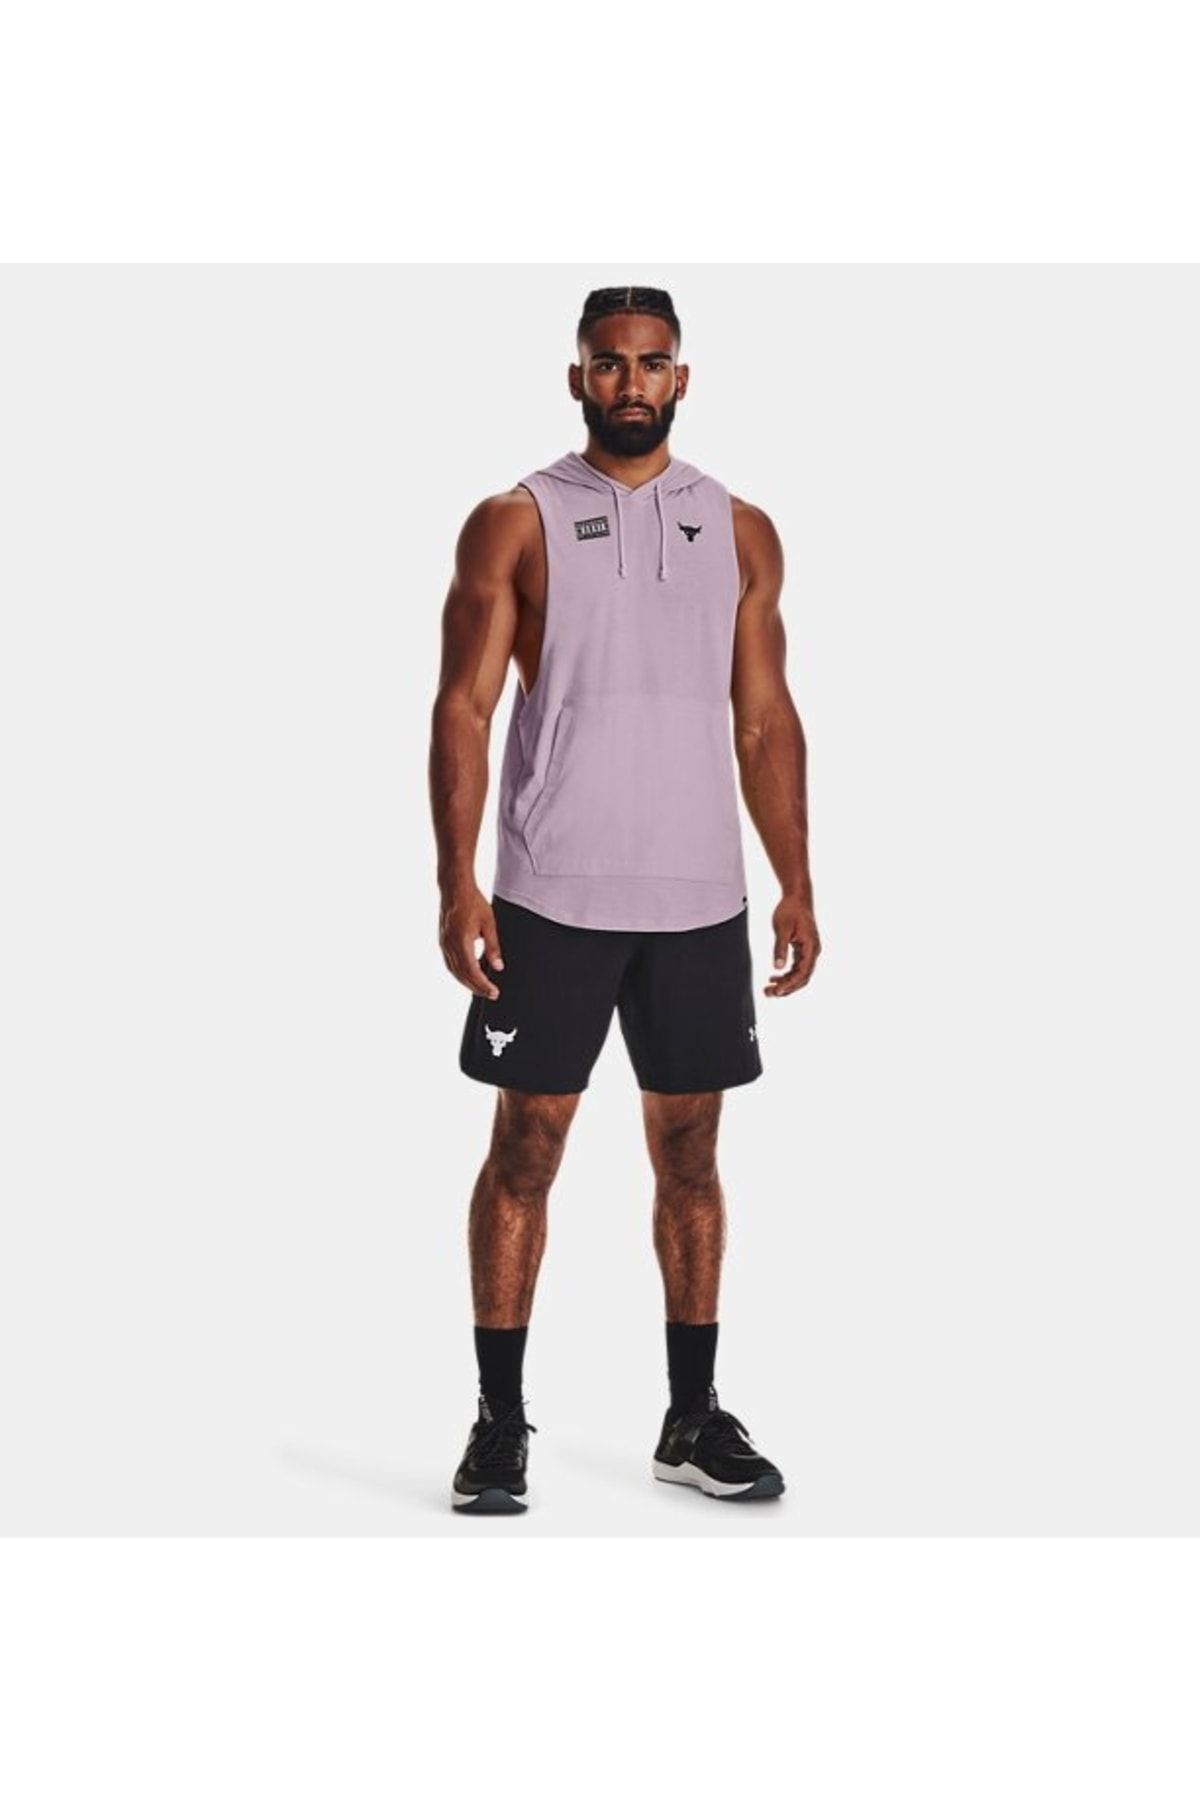 Under Armour Men's Project Rock Show Your Work Sleeveless - Trendyol